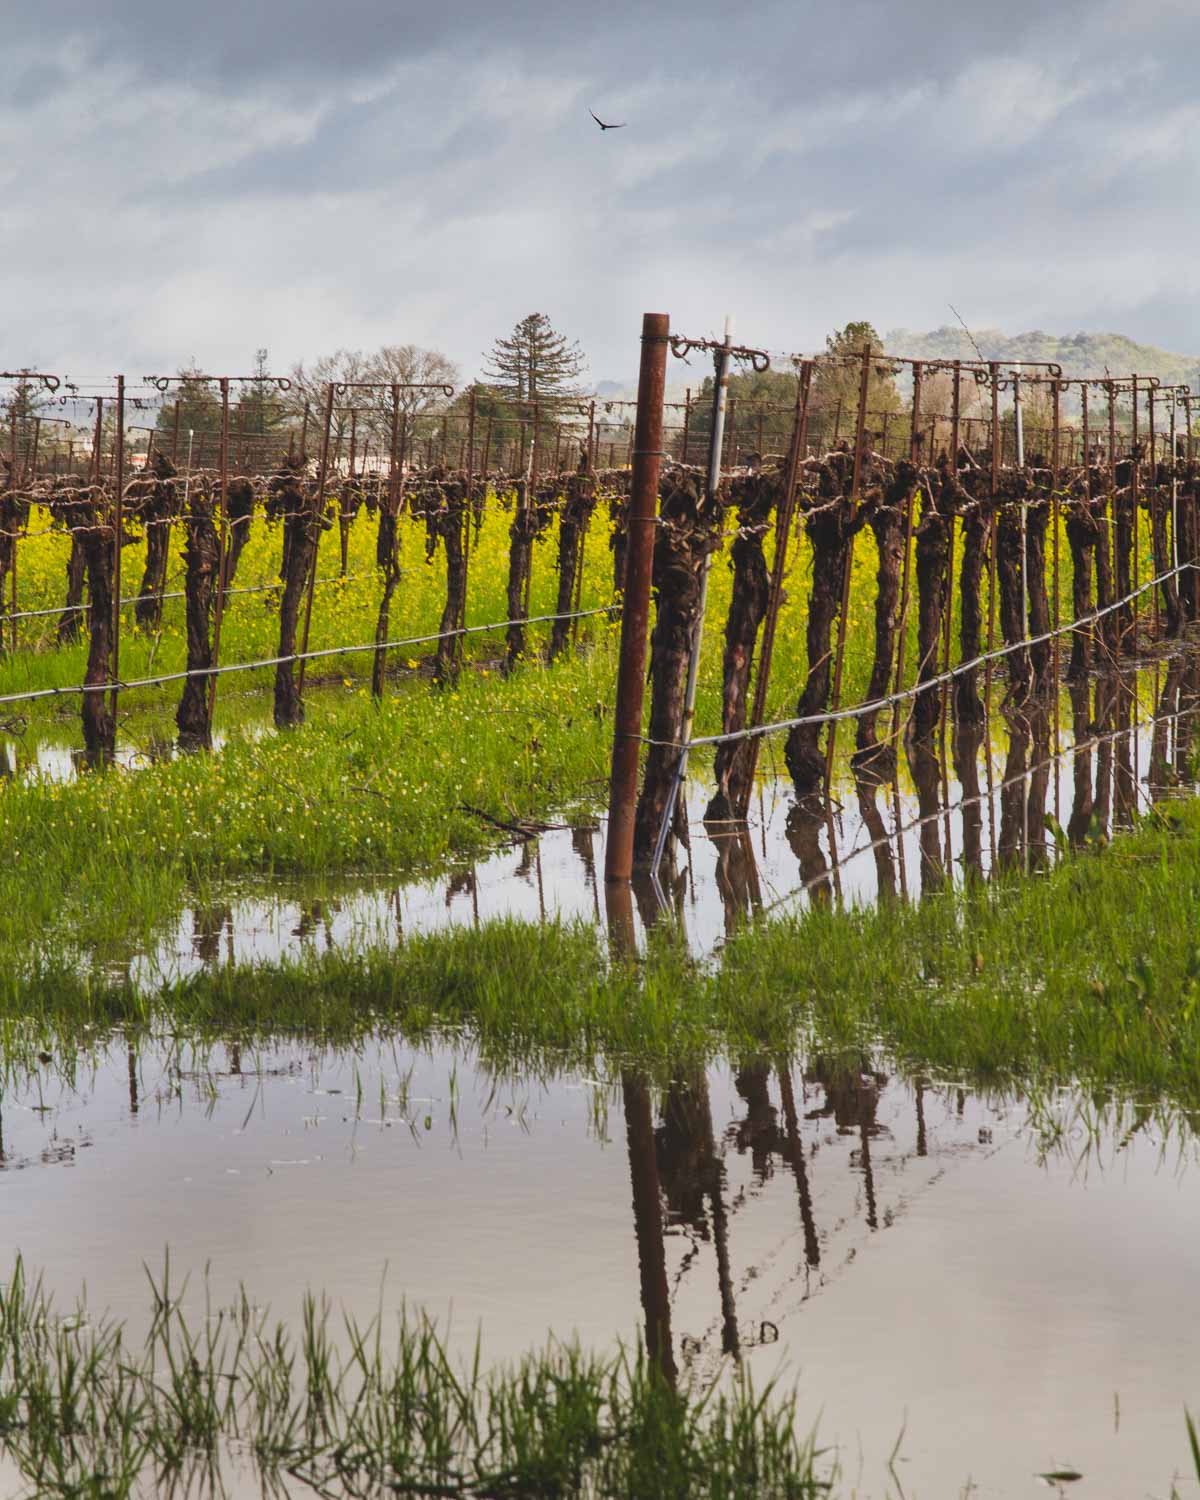 While not having a vineyard parched dry seems good, what do extremely wet conditions do to grape vines?